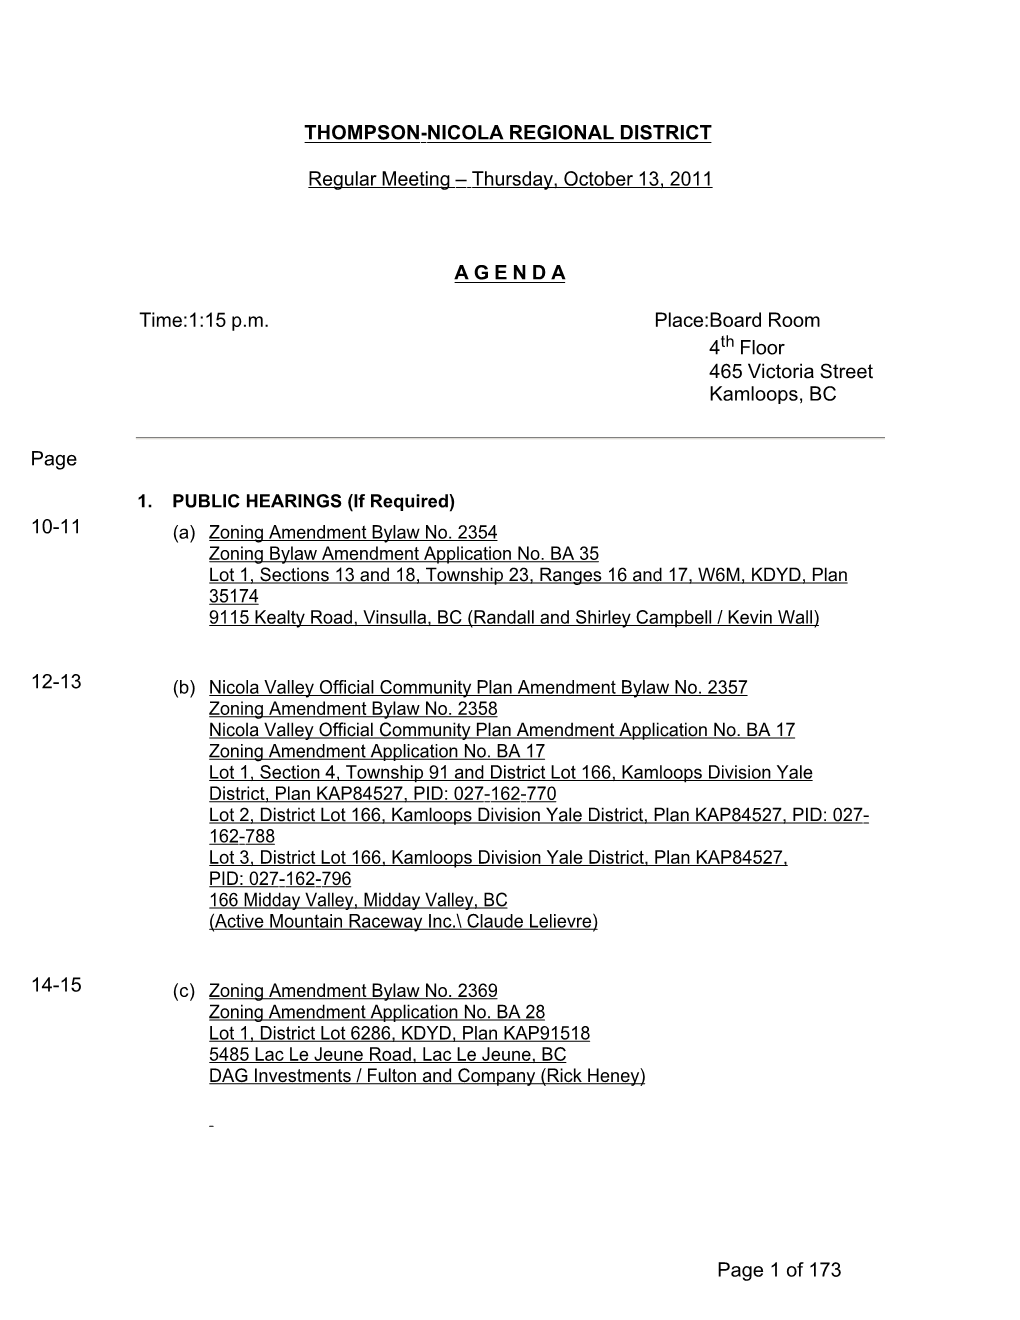 Thursday, October 13, 2011 AGENDA Time: 1:15 Pm Place: Board Room 4